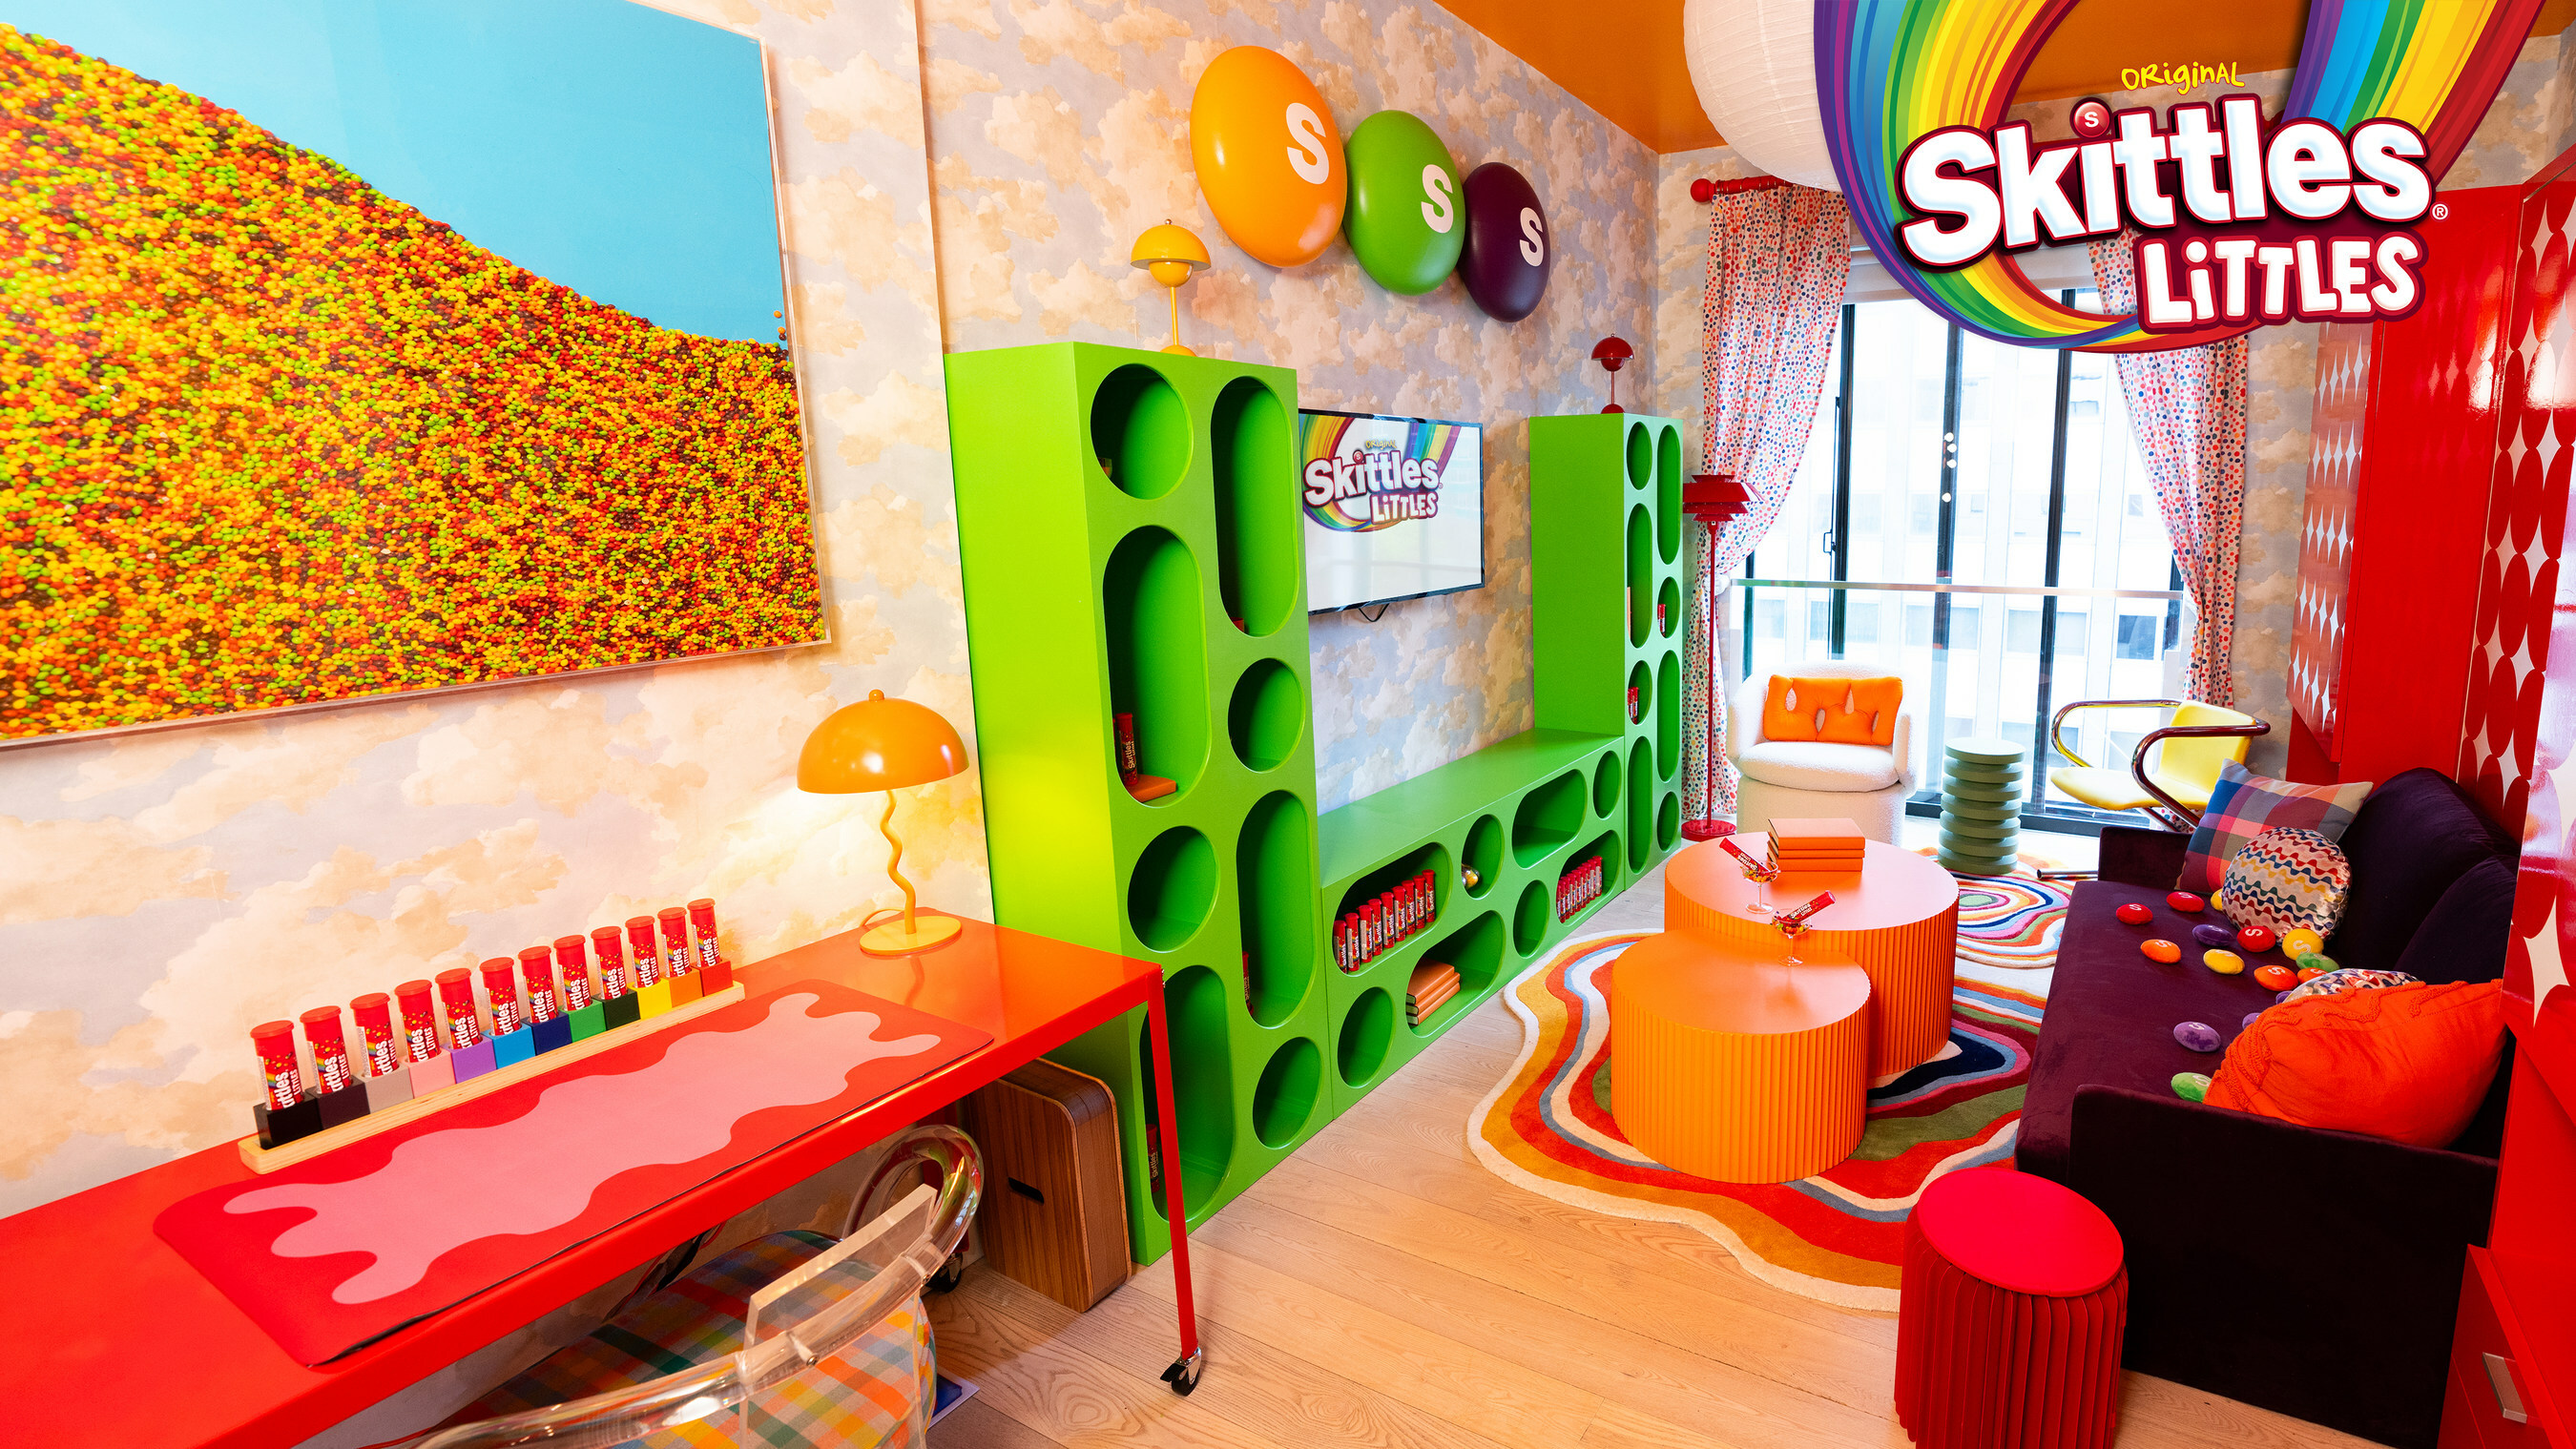 Live Large in the Littlest of Spaces: SKITTLES Littles